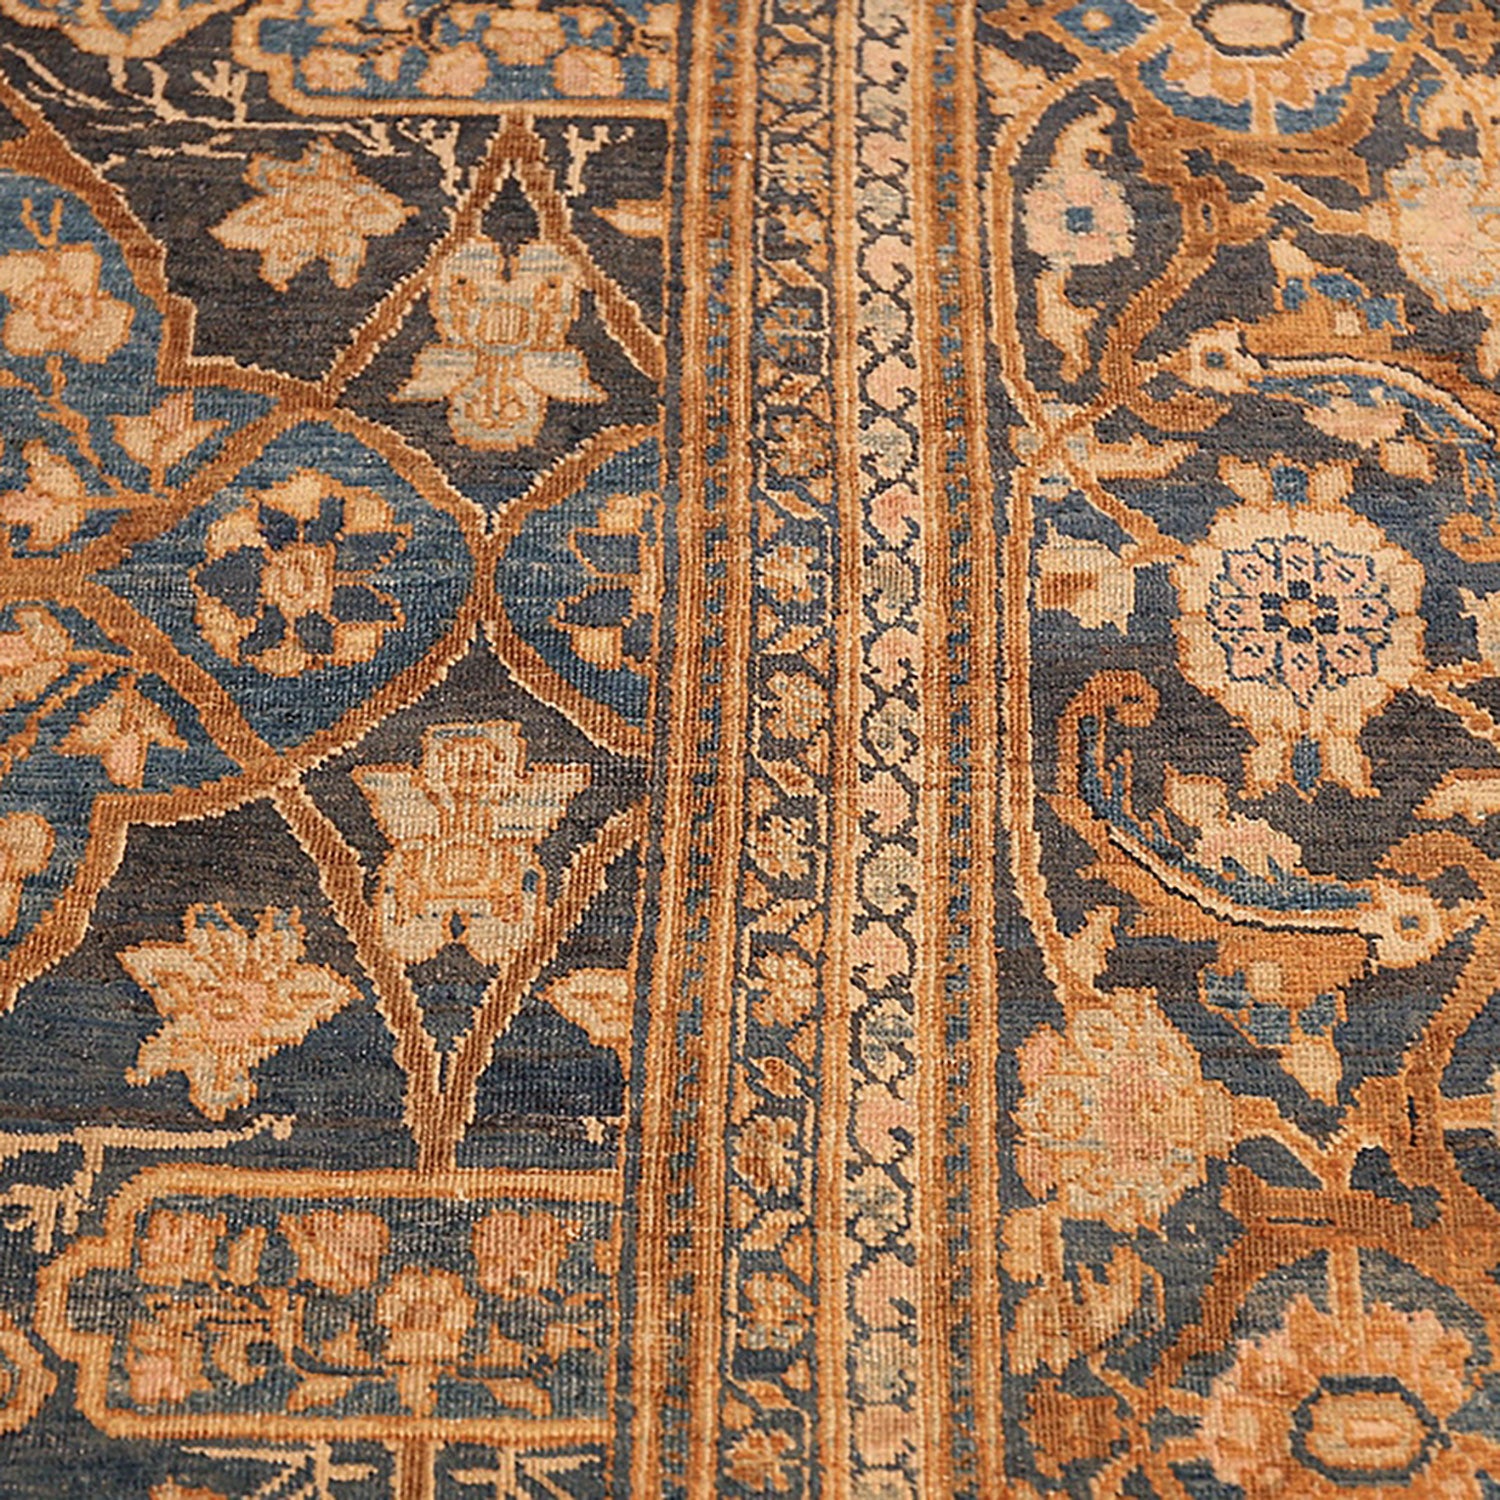 Intricate traditional rug showcases symmetrical motifs in blue, beige, and orange.